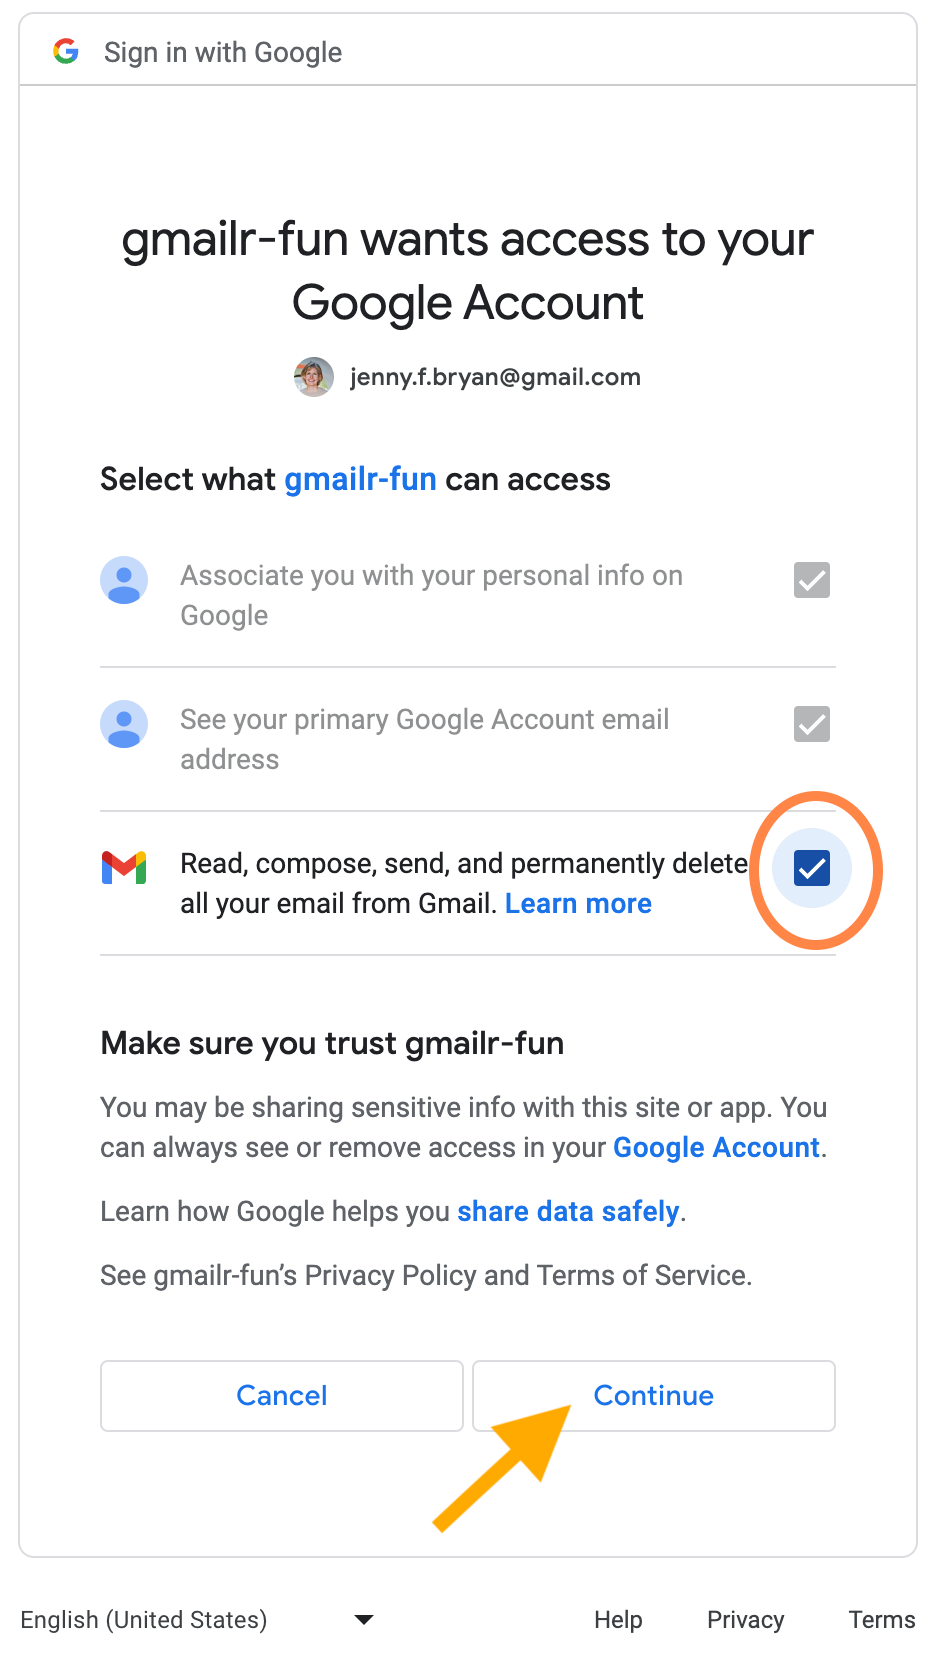 Screenshot that reads: "gmailr-fun wants access to your Google Account". Then it shows the email "jenny.f.bryan@gmail.com". Next the text "Select what gmailr-fun can access". The choice "Associate you with your personal info on Google" is preselected and greyed out, indicating this choice cannot be altered. The choice "See your primary Google Account email address" is preselected and greyed out, indicating this choice cannot be altered. The choice "Read, compose, send, and permanently delete all your email from Gmail" has been checked. This is emphasized with an orange oval. Then there is text: "Make sure you trust gmailr-fun. You may be sharing sensitive info with this site or app. You can always see or remove access in your Google Account. There is an arrow pointing at the "Continue" button at the bottom of the page.